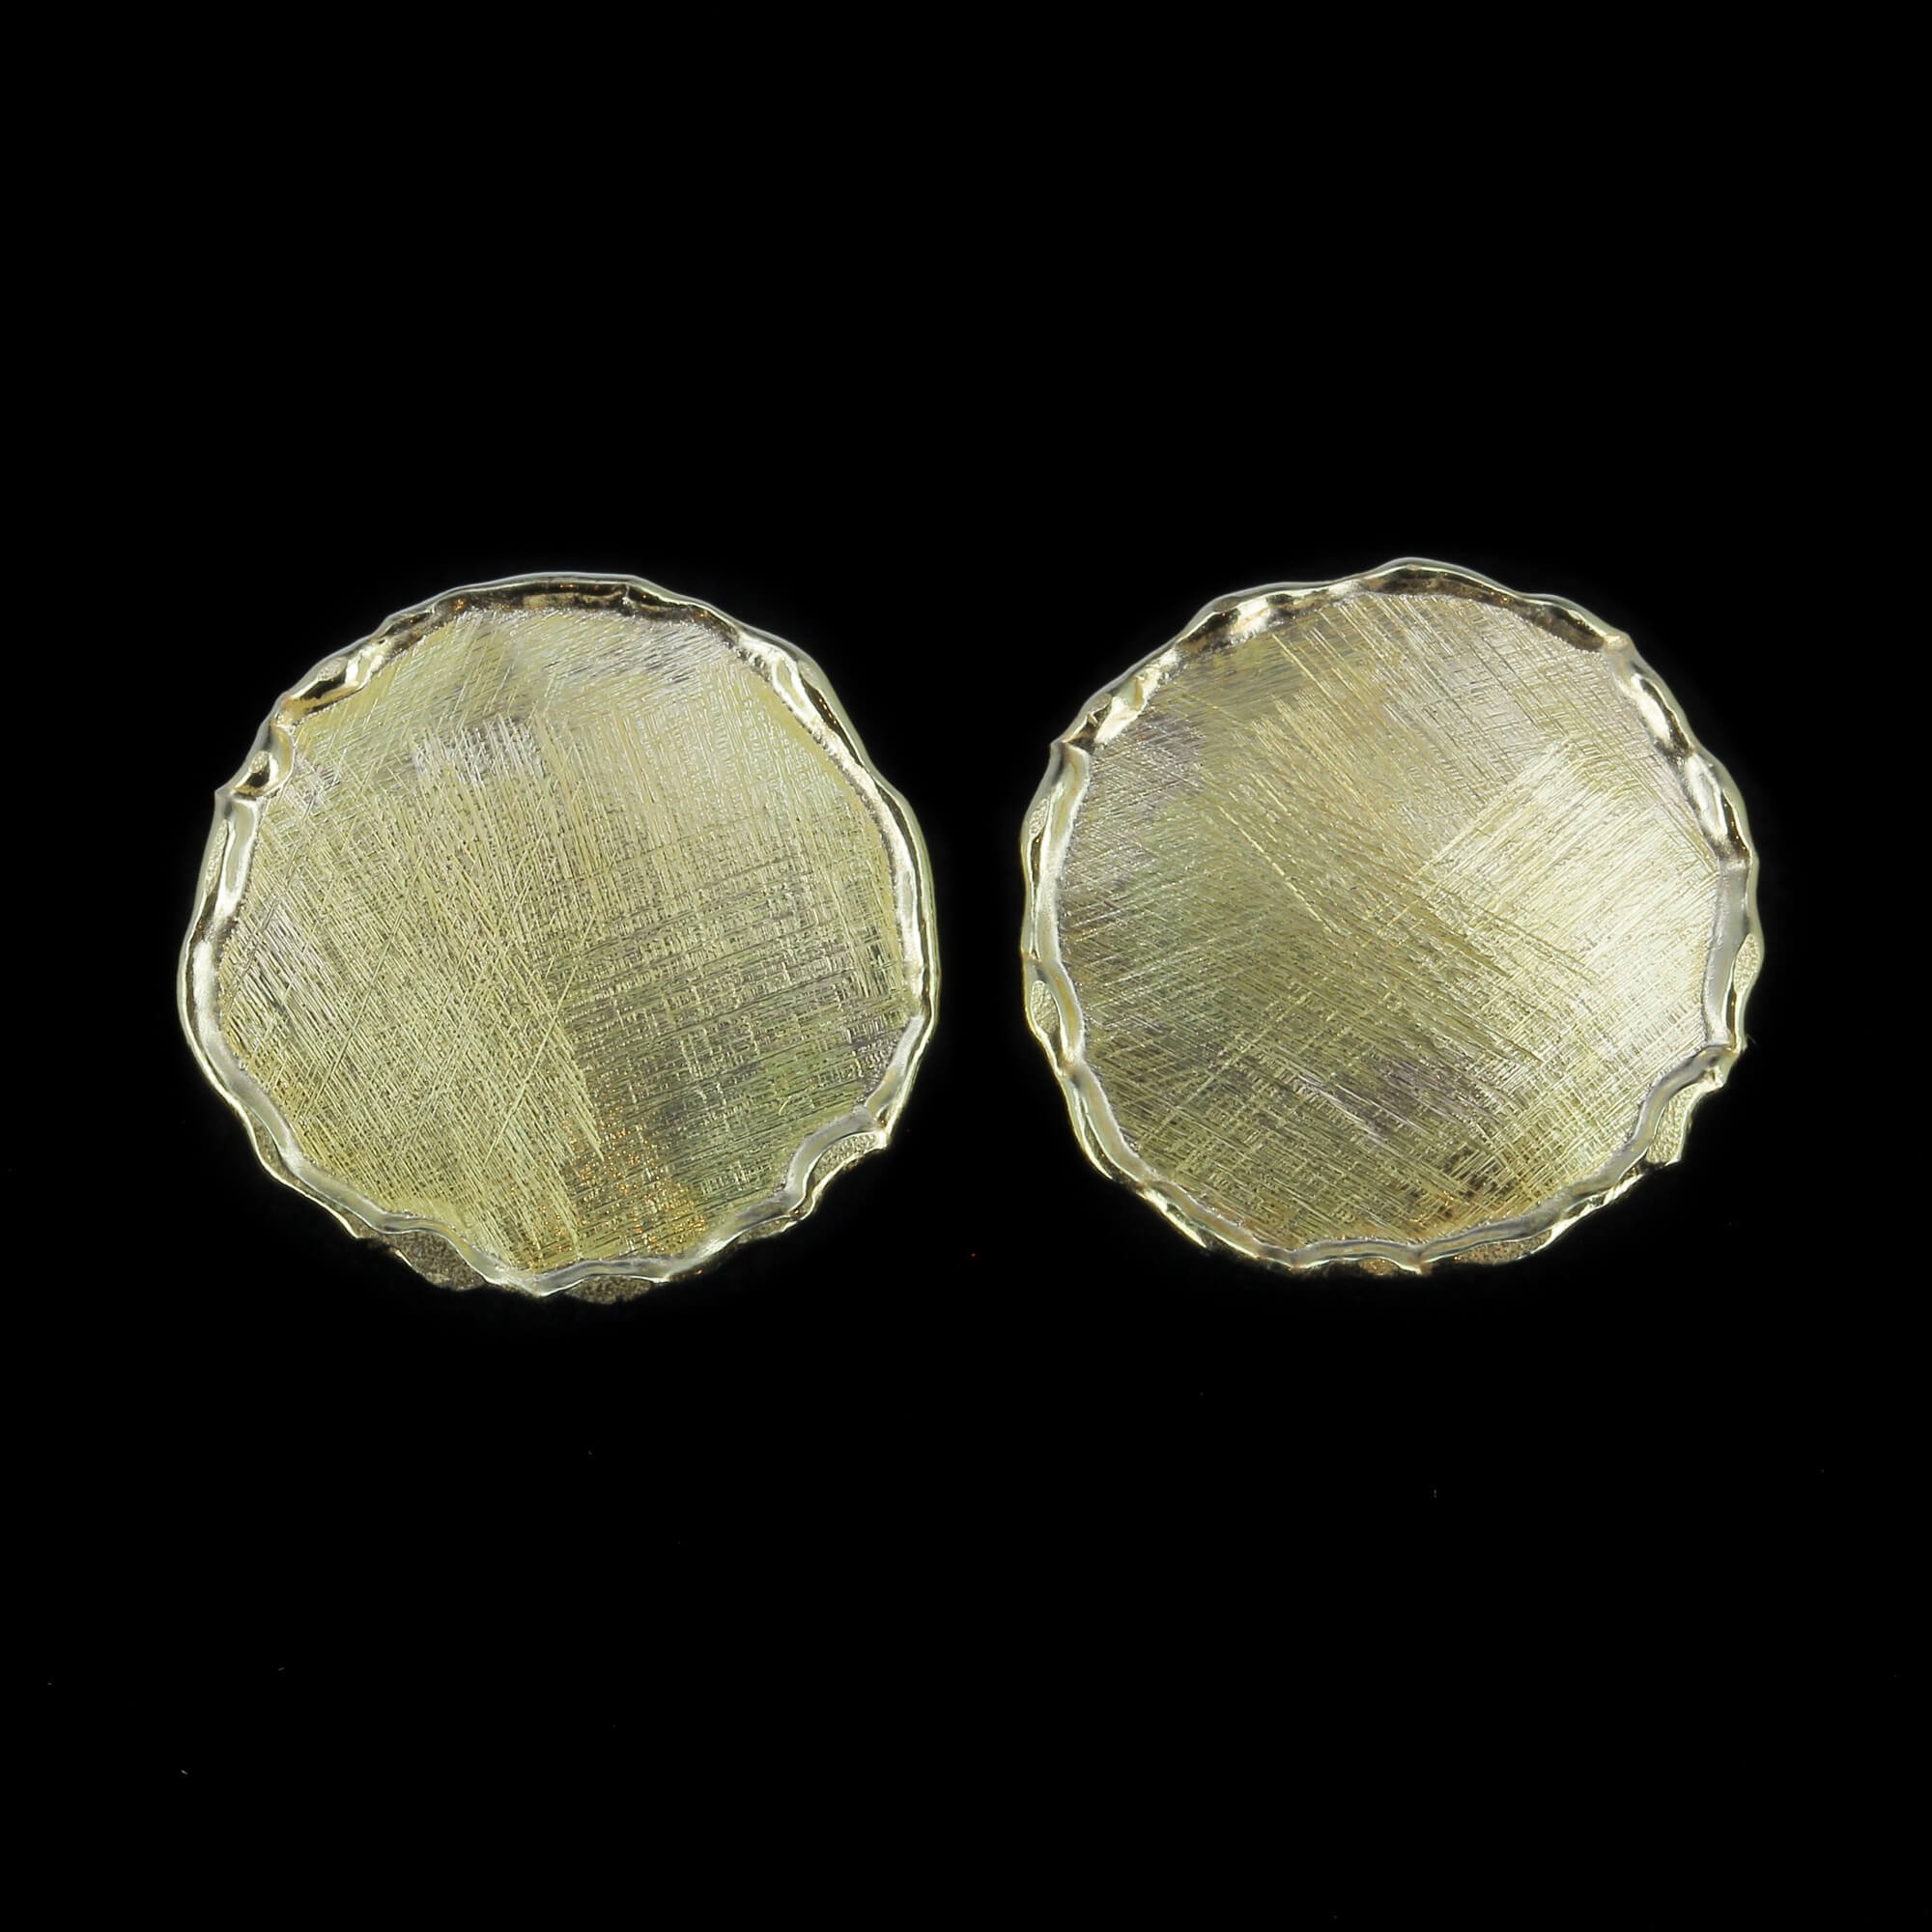 Small round and unmeated earrings of 18kt gold